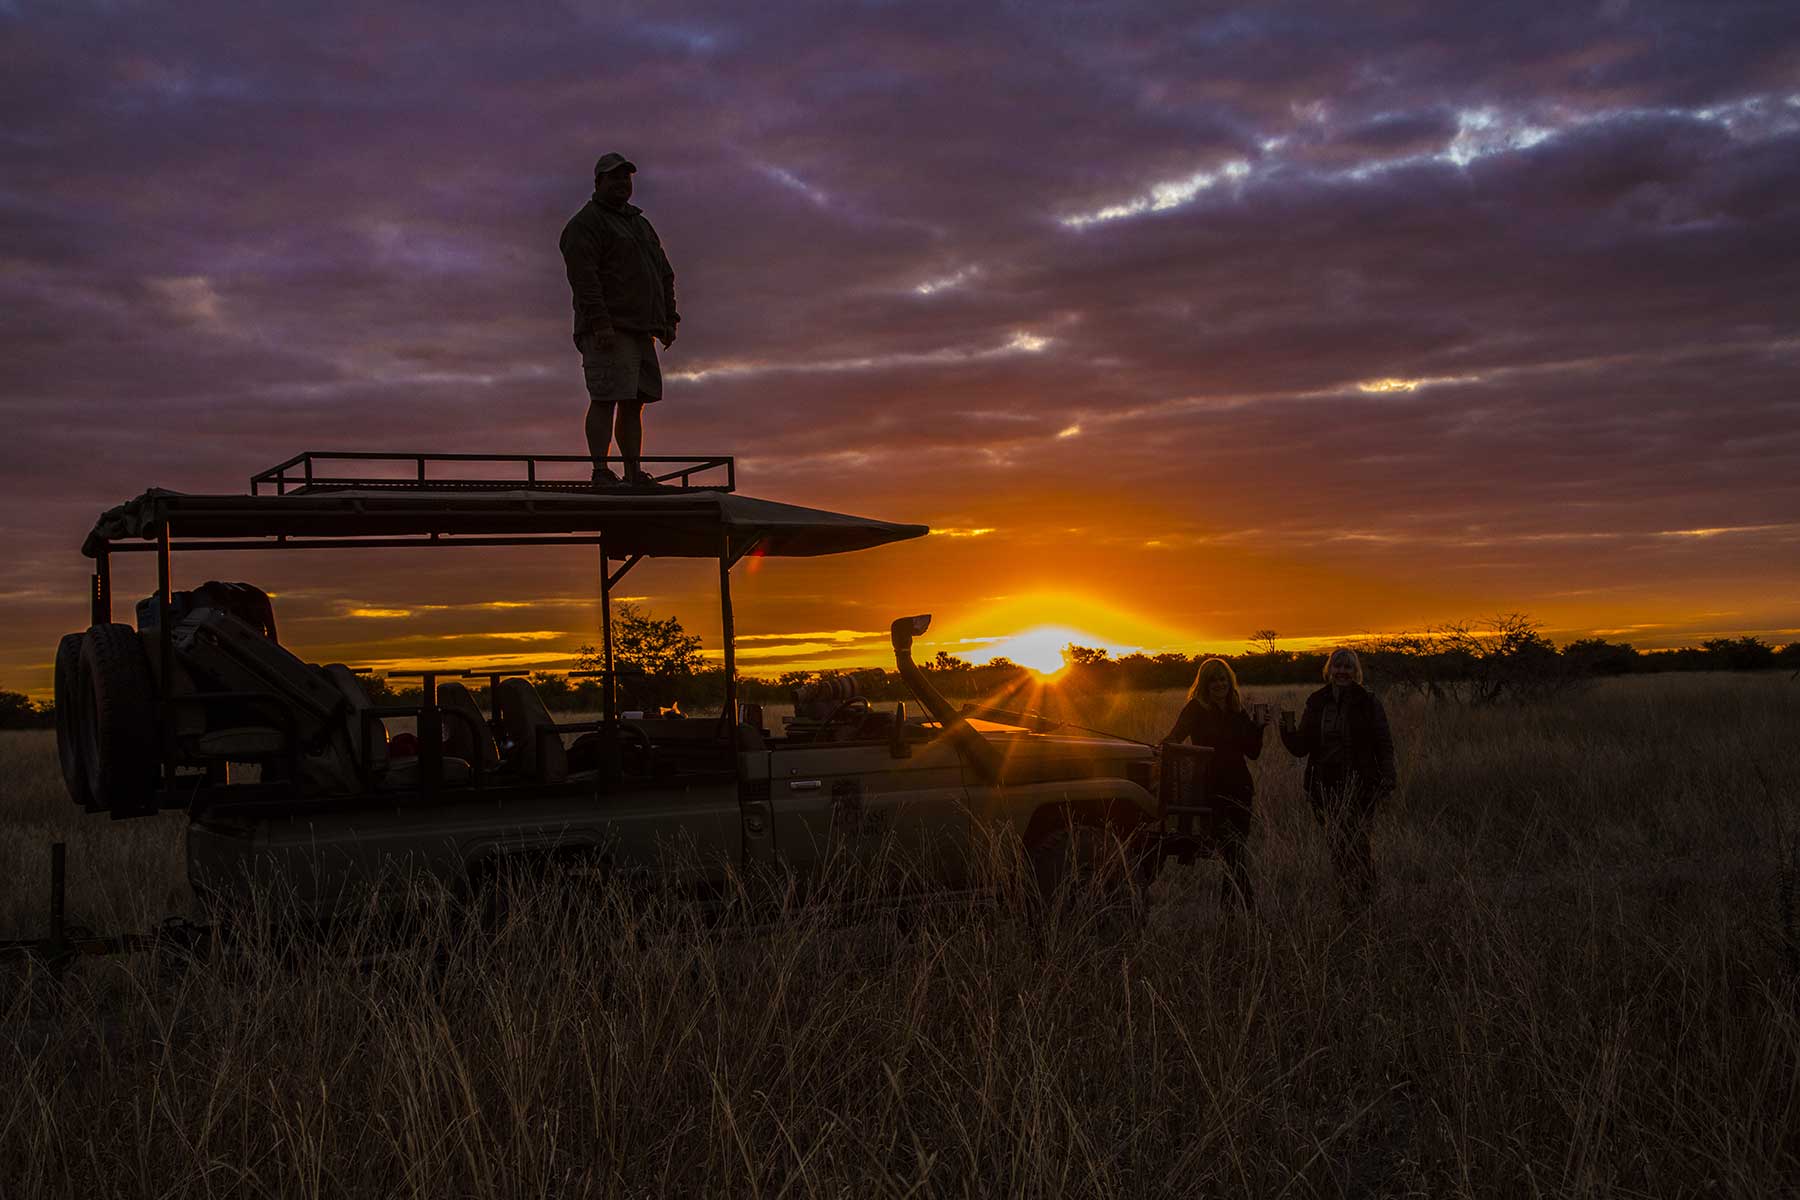 Sunset game drive with Chase Africa Safaris